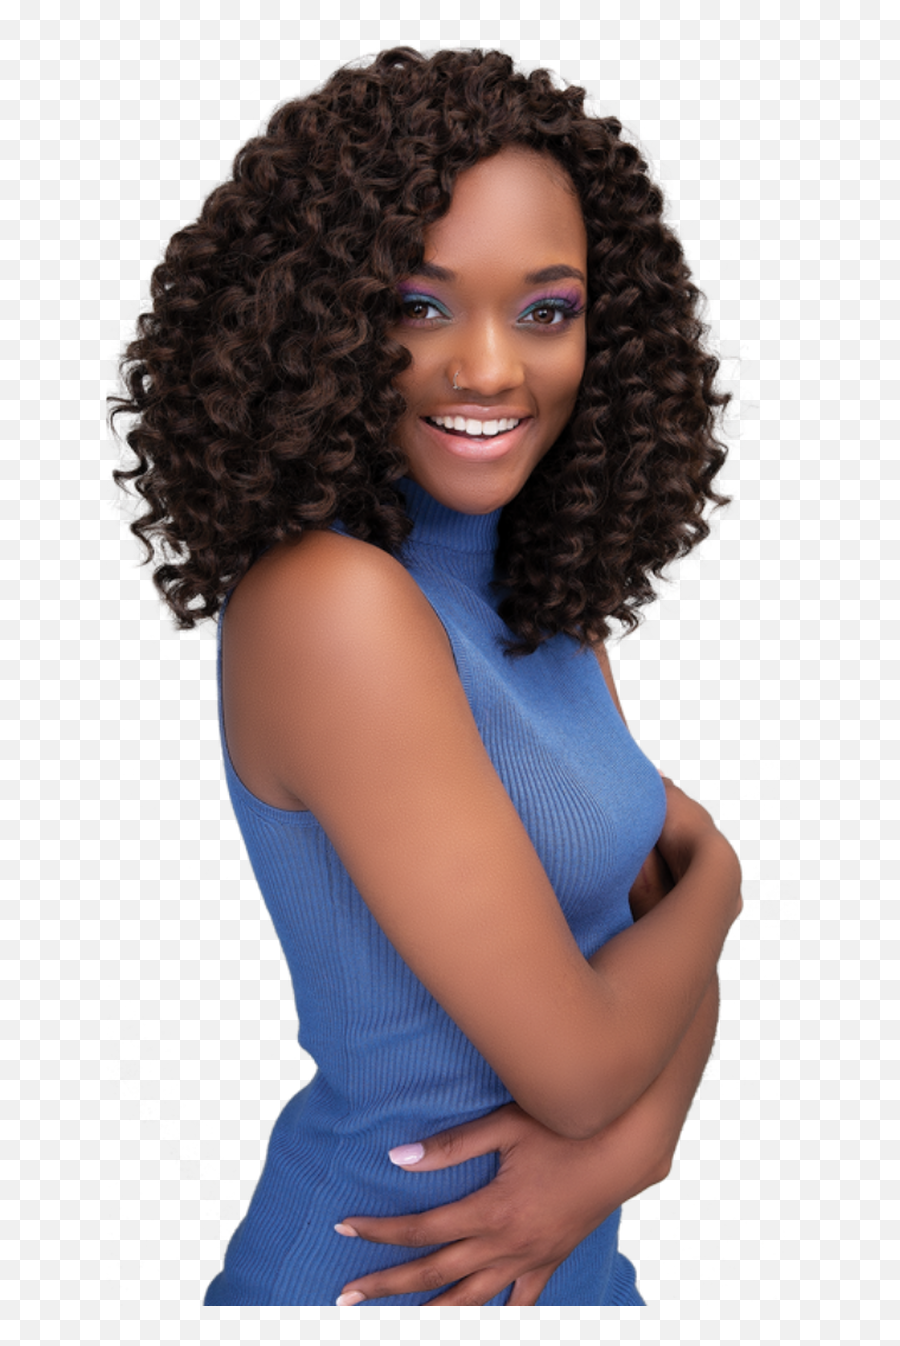 Janet 3x Chic N Curly - 3x Chic N Curl Png,Icon Girl Half Wig